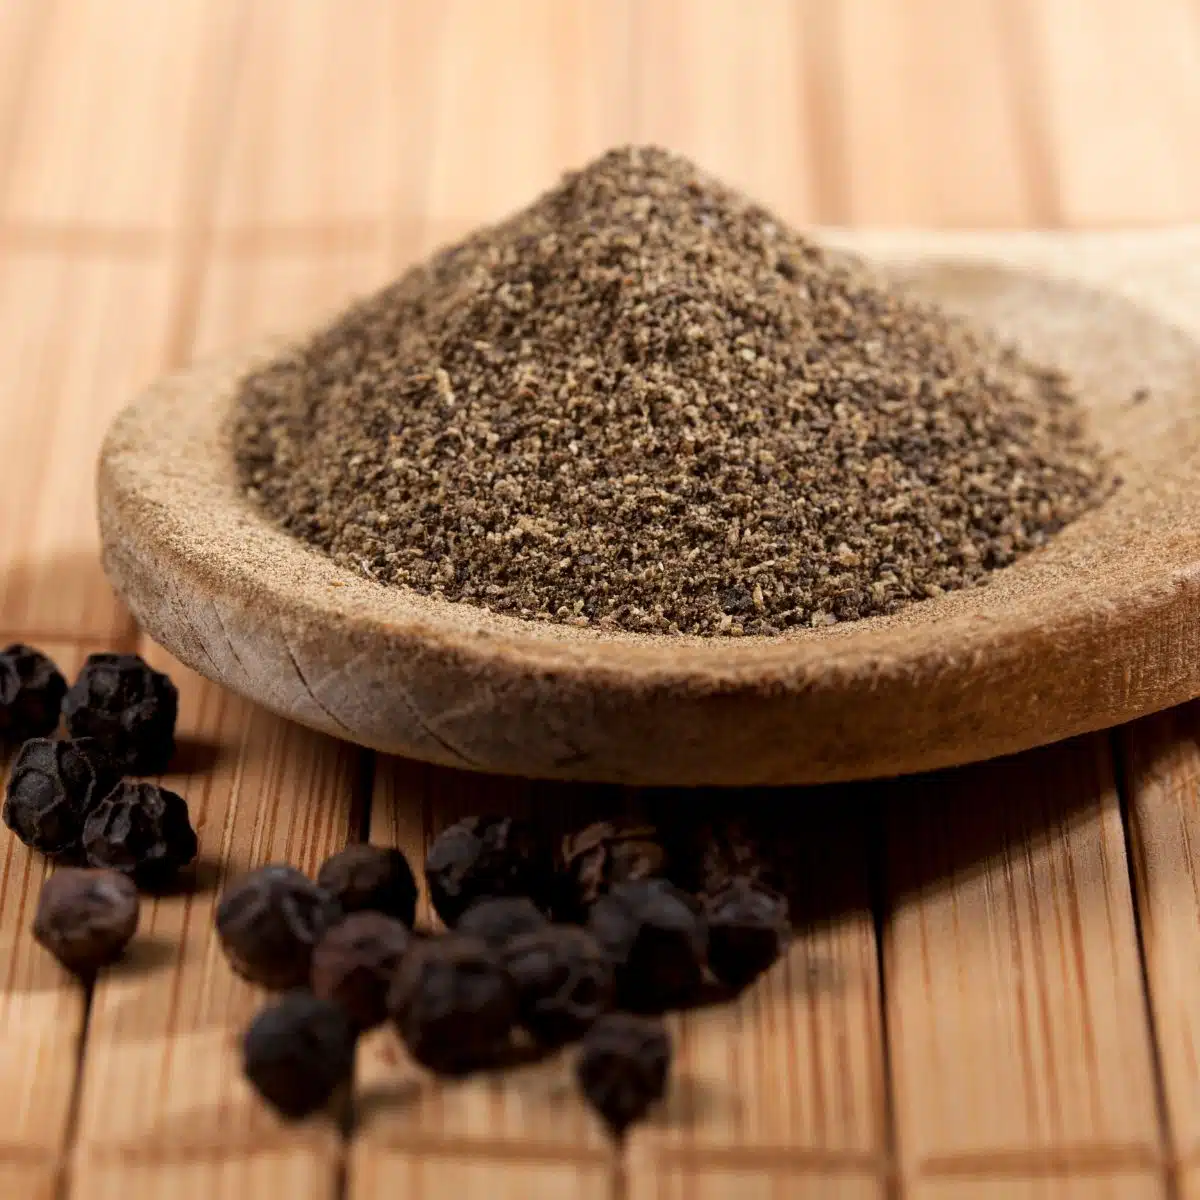 Square image of black pepper in a small dish.